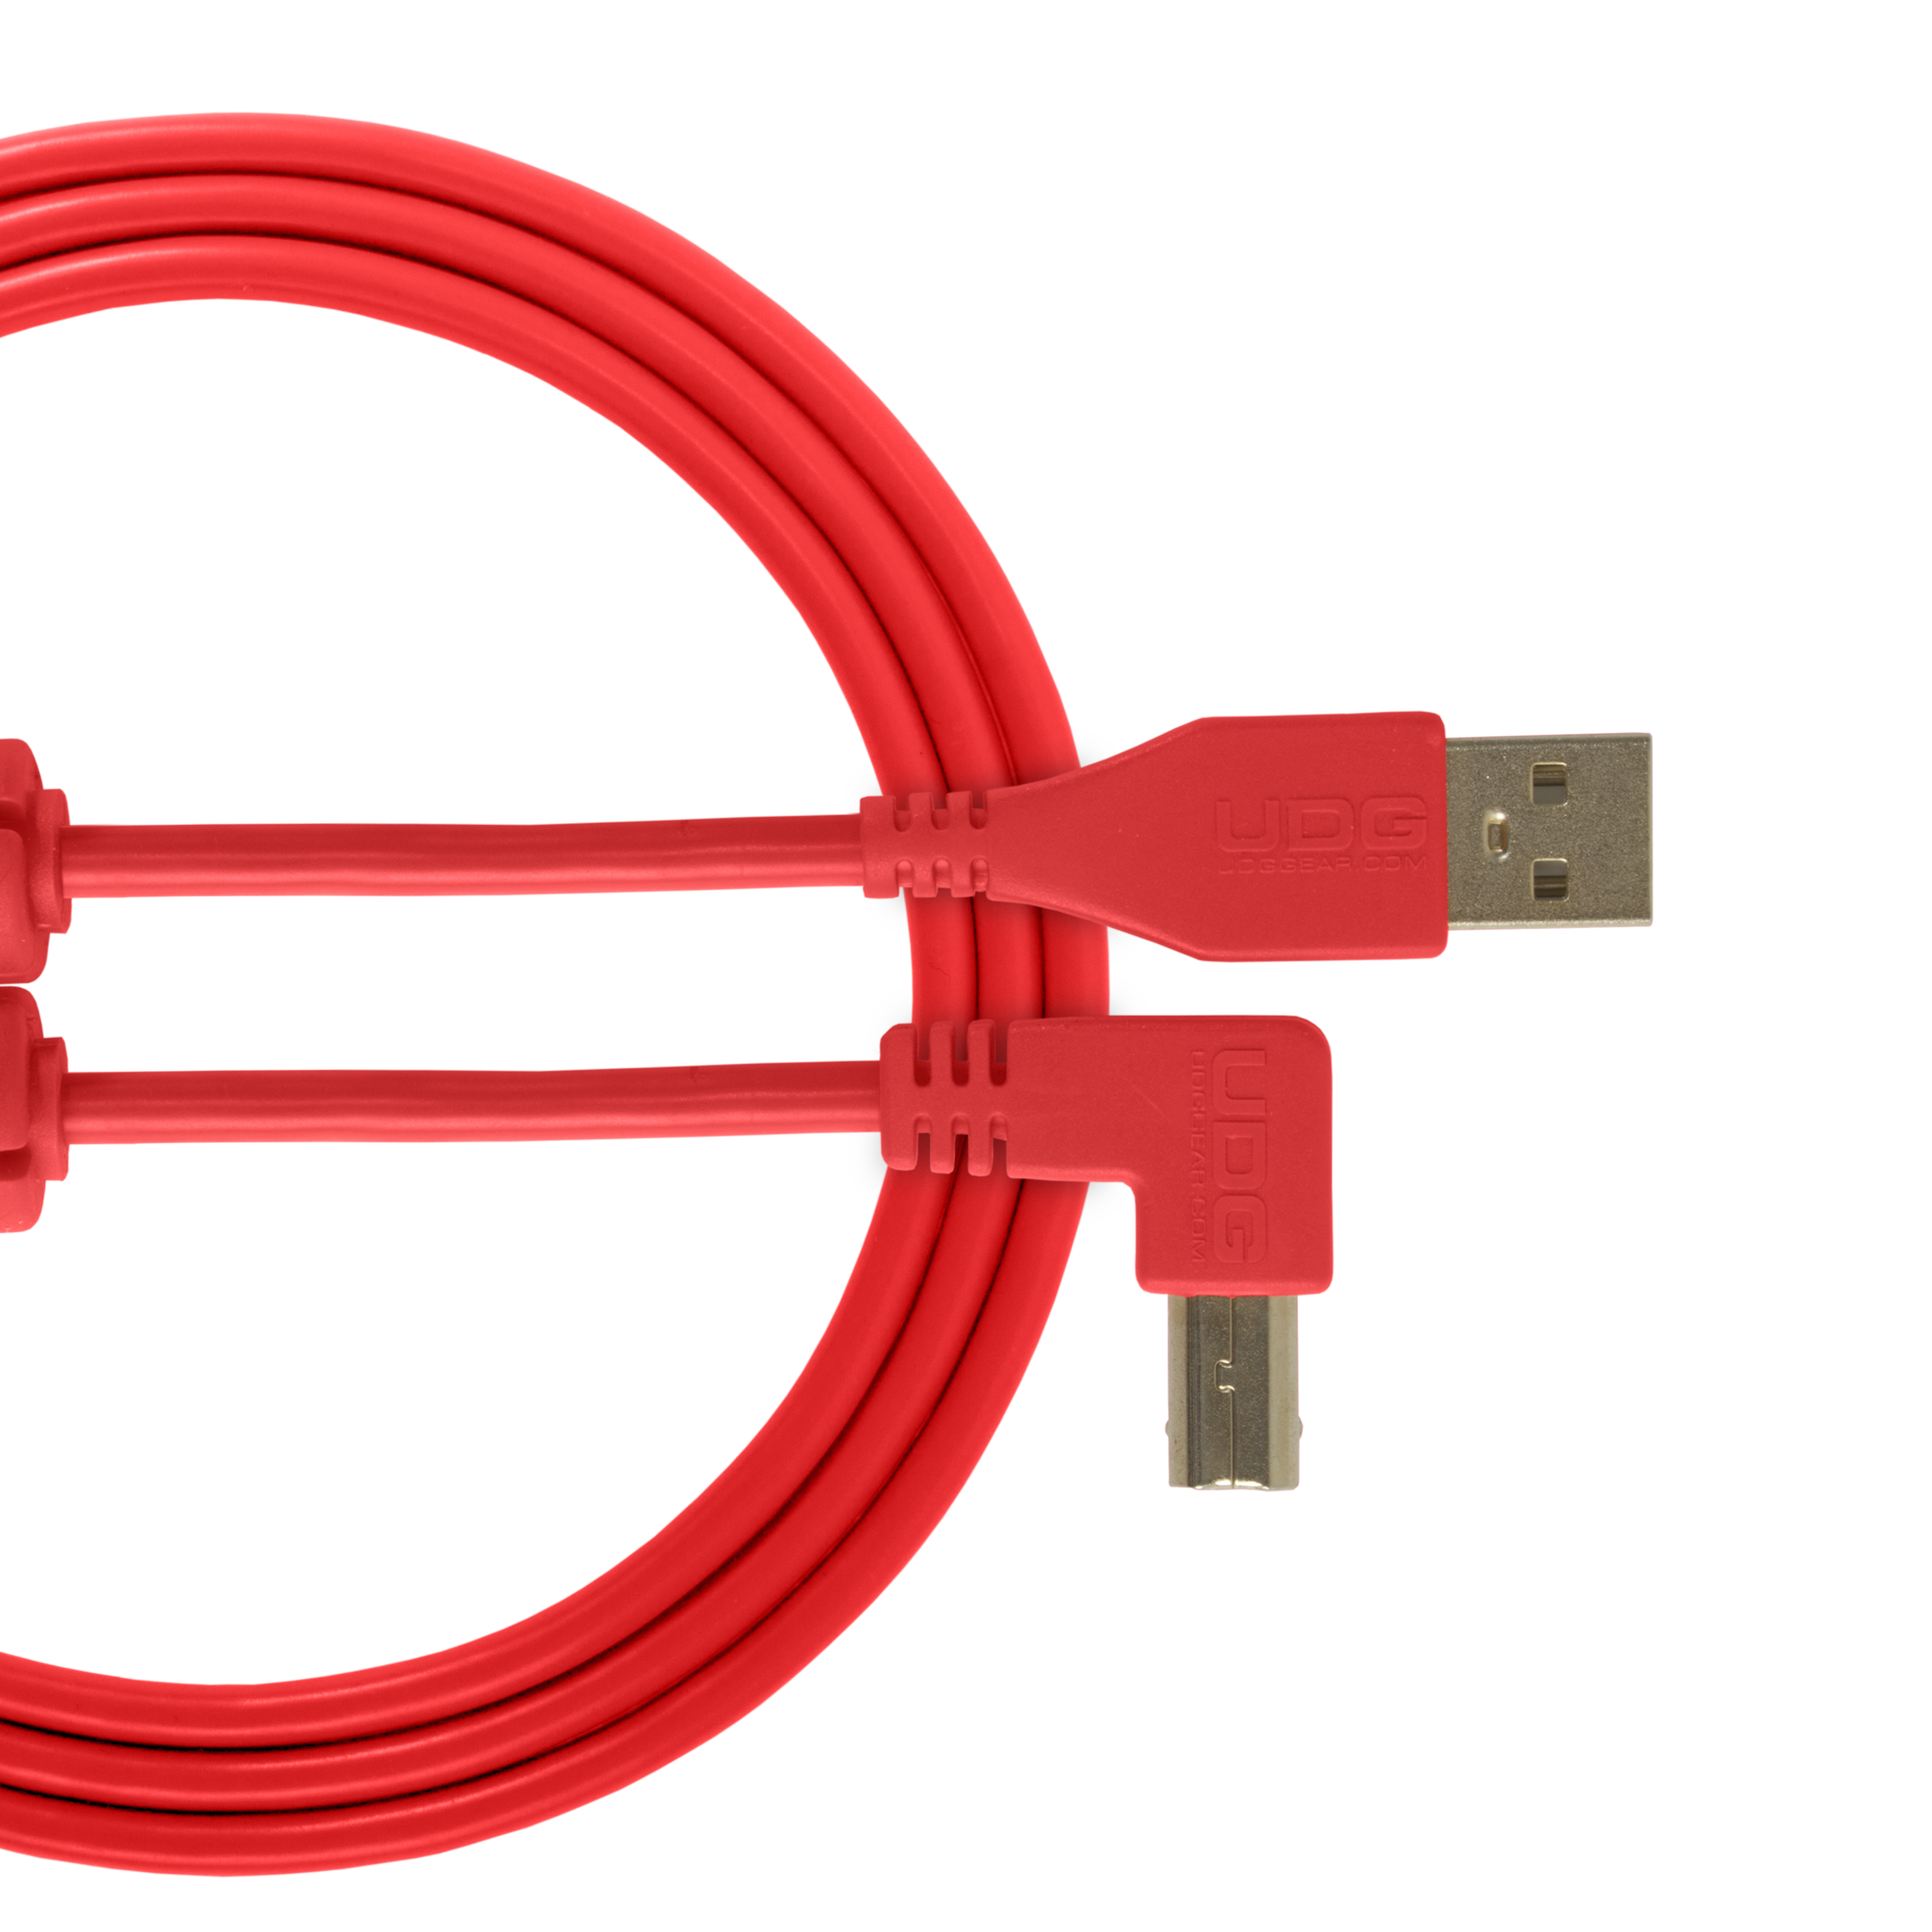 UDG Ultimate Audio Cable USB 2.0 A-B Red Angled 1 m